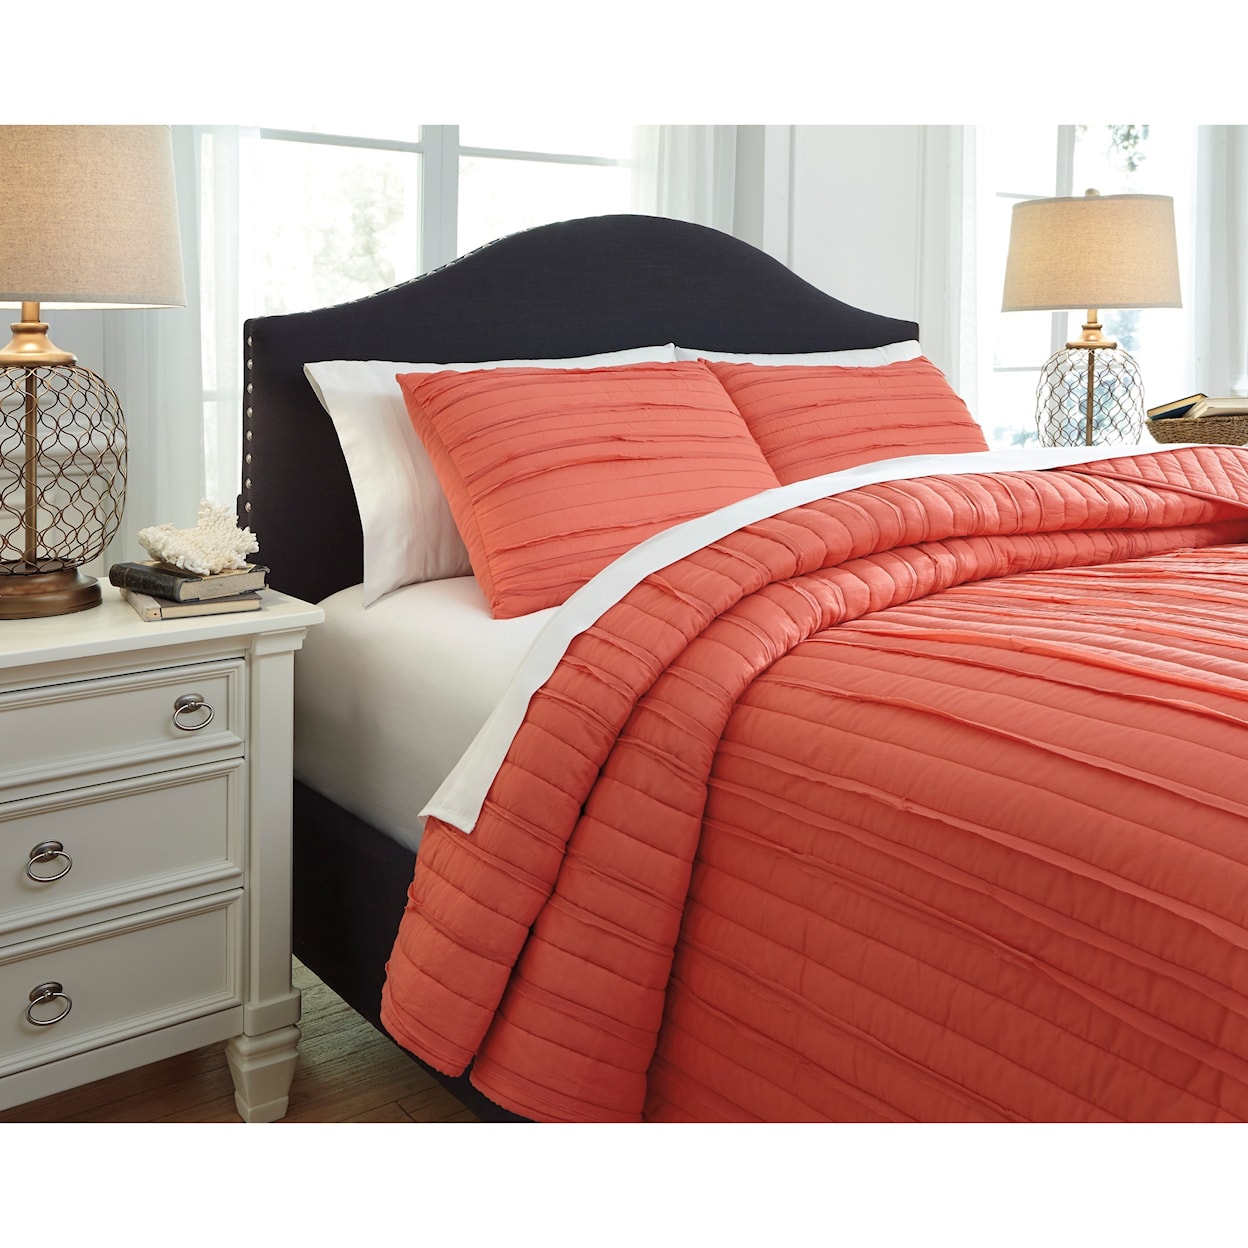 Signature Design by Ashley Furniture Bedding Sets Queen Solsta Coral Coverlet Set